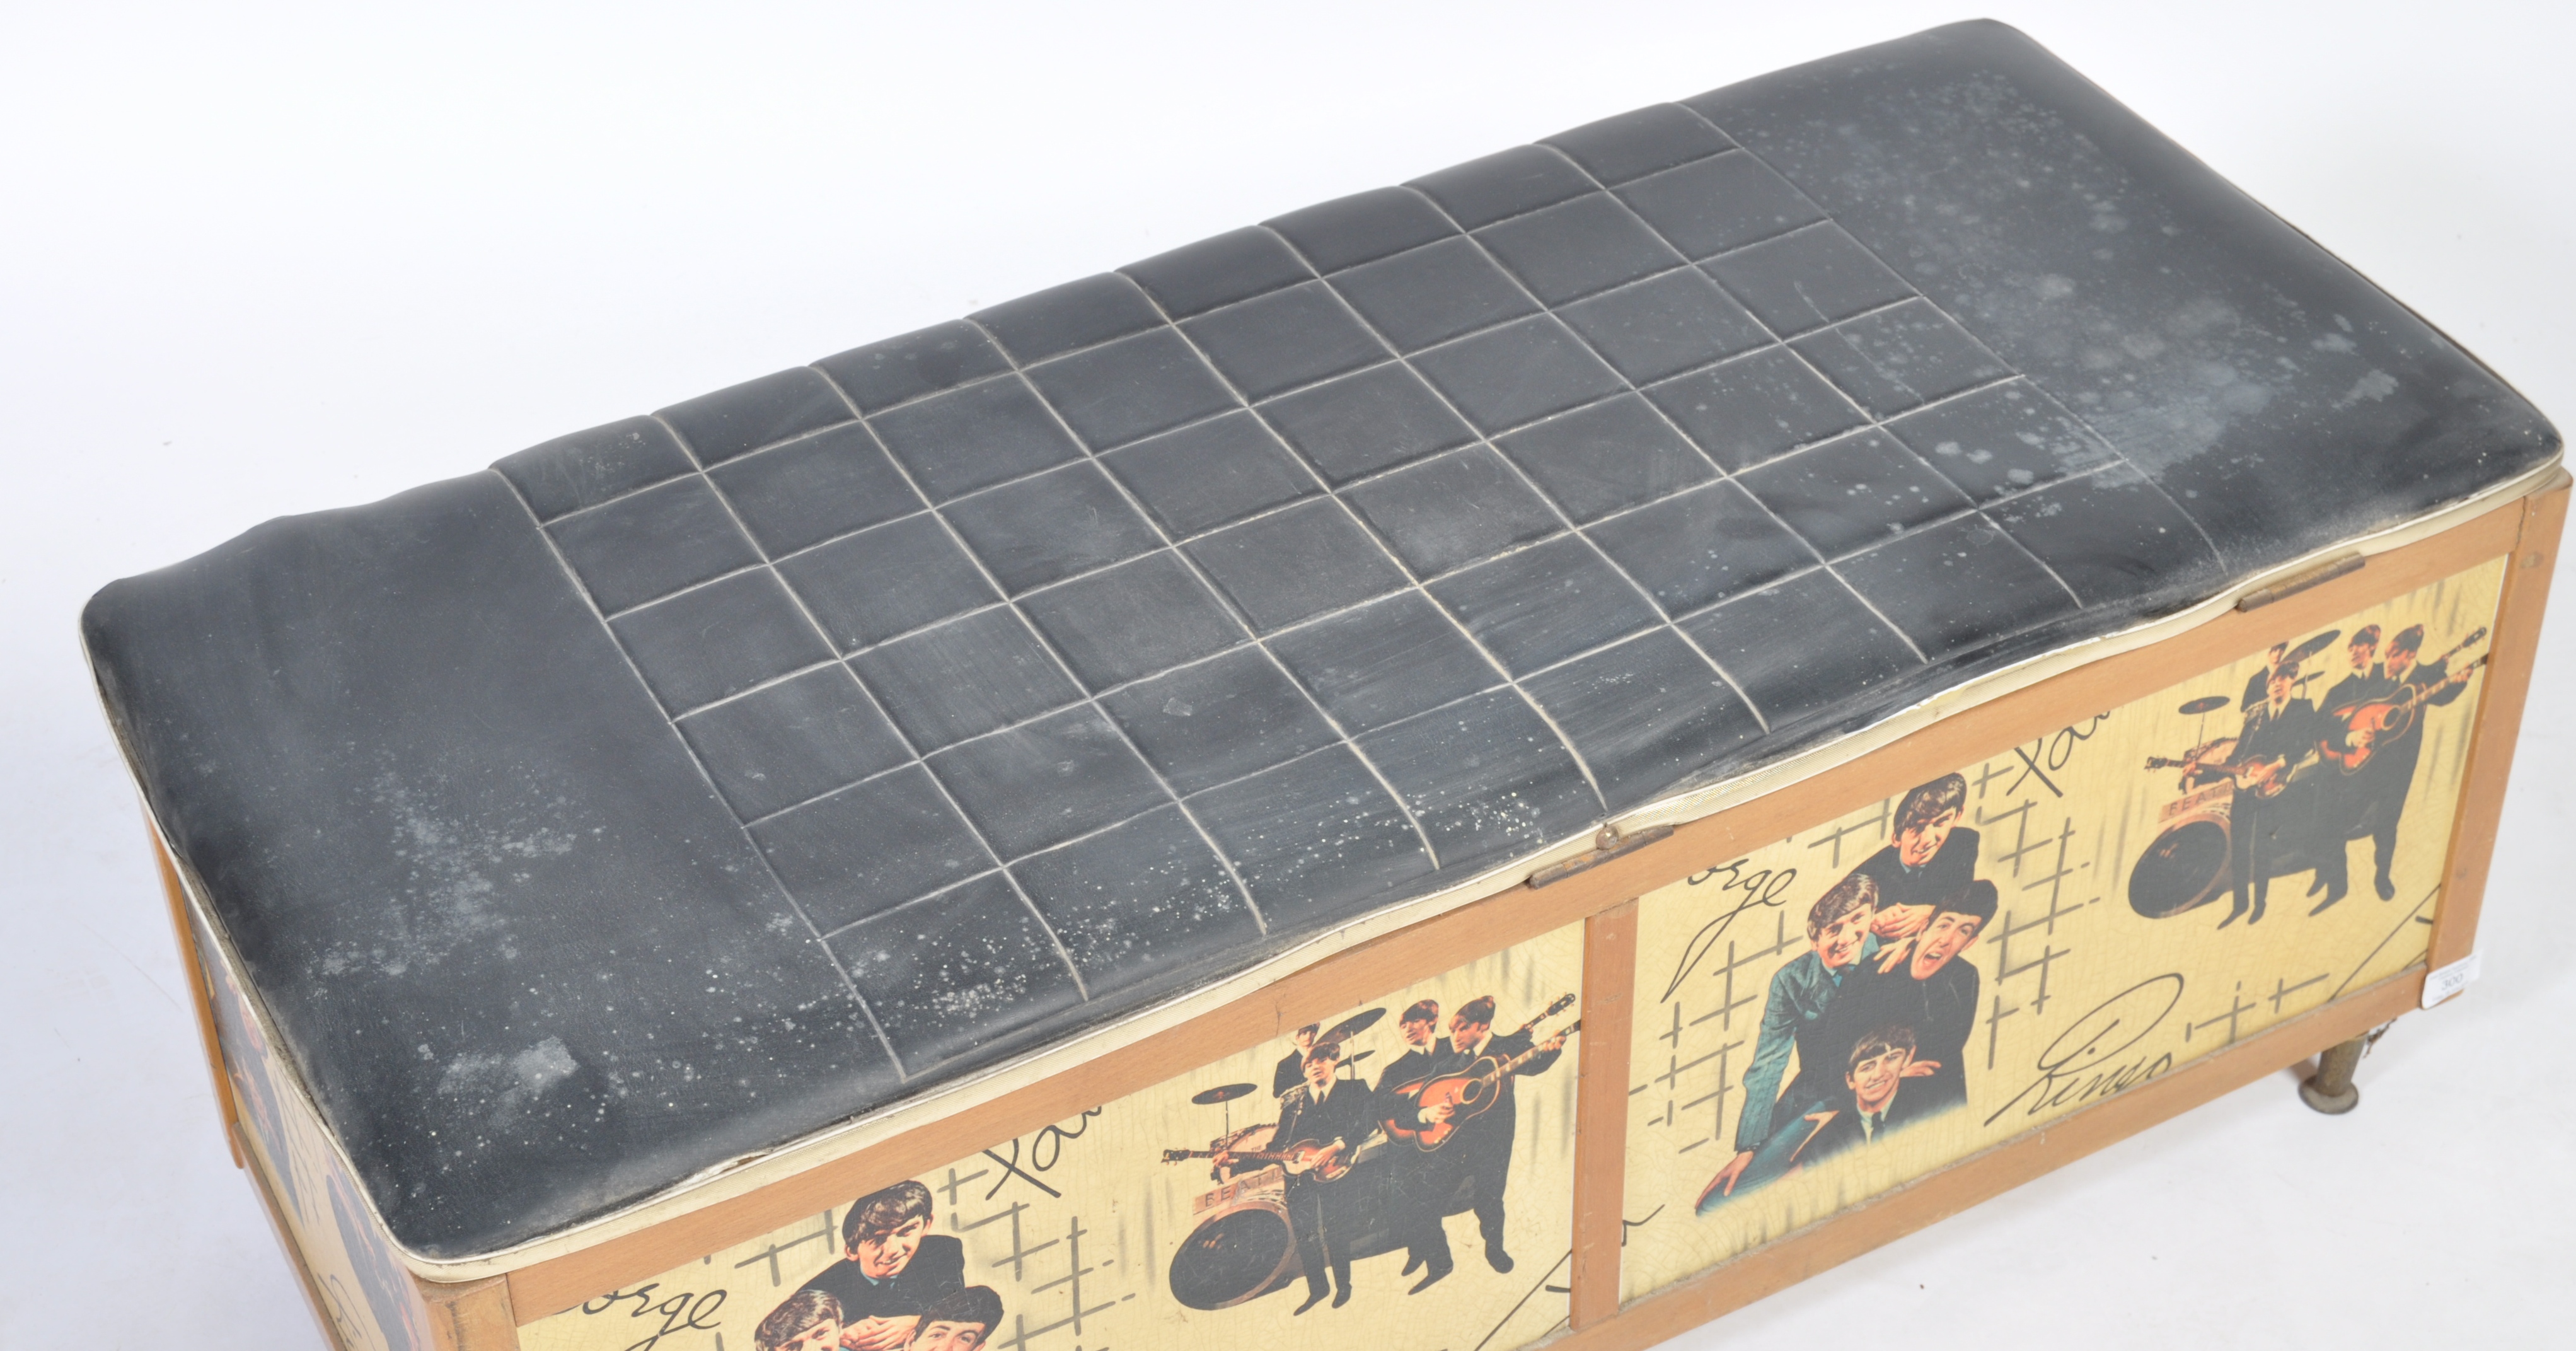 RARE 1960'S BEATLES OTTOMAN / BLANKET BOX BY AVALO - Image 4 of 8